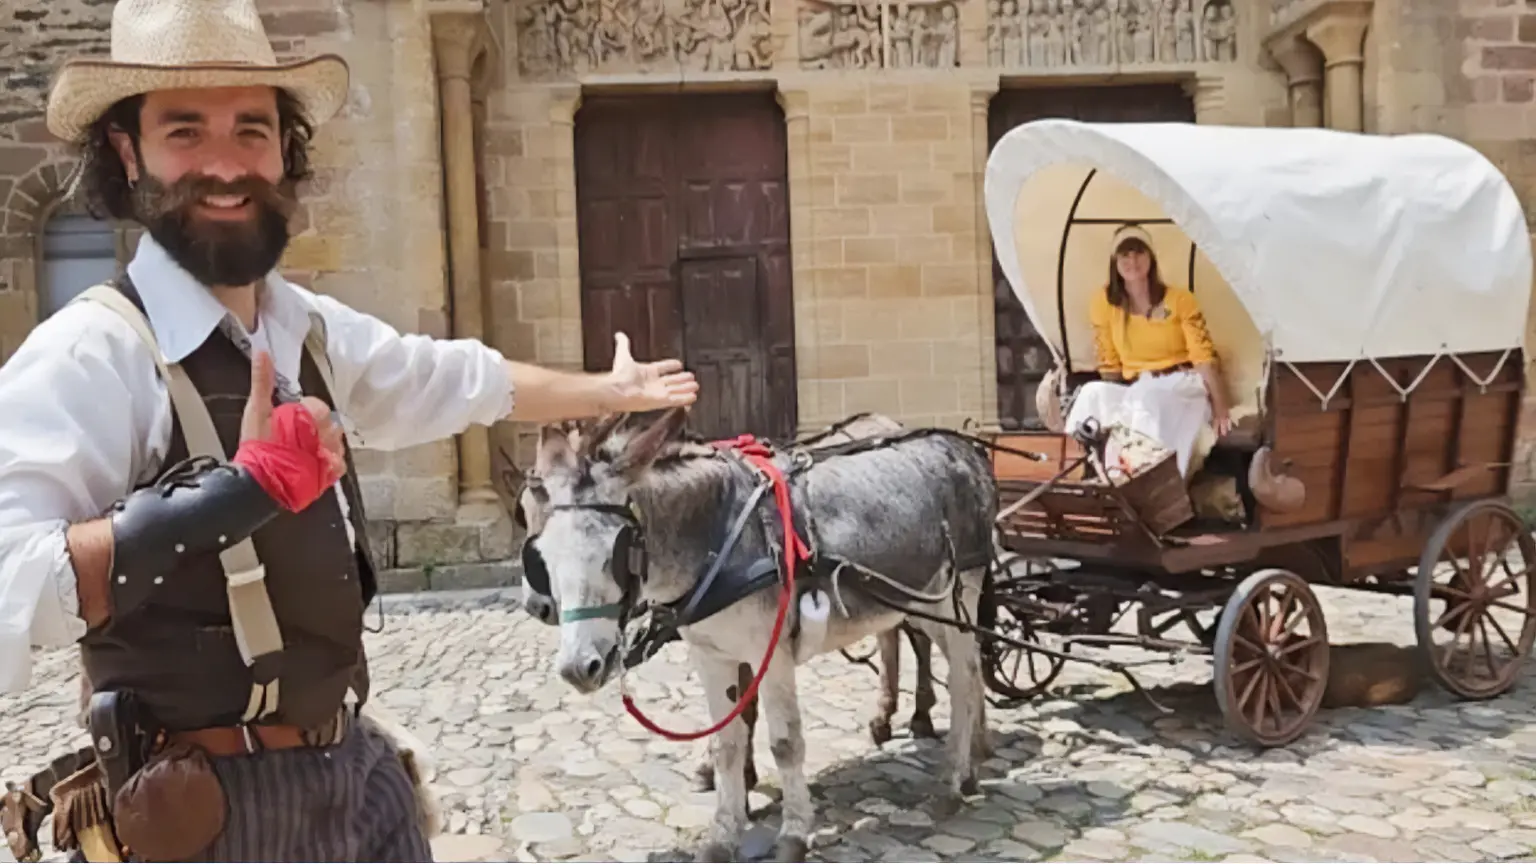 Céleste and Charlotte’s journey in a horse-drawn carriage to meet the Pope